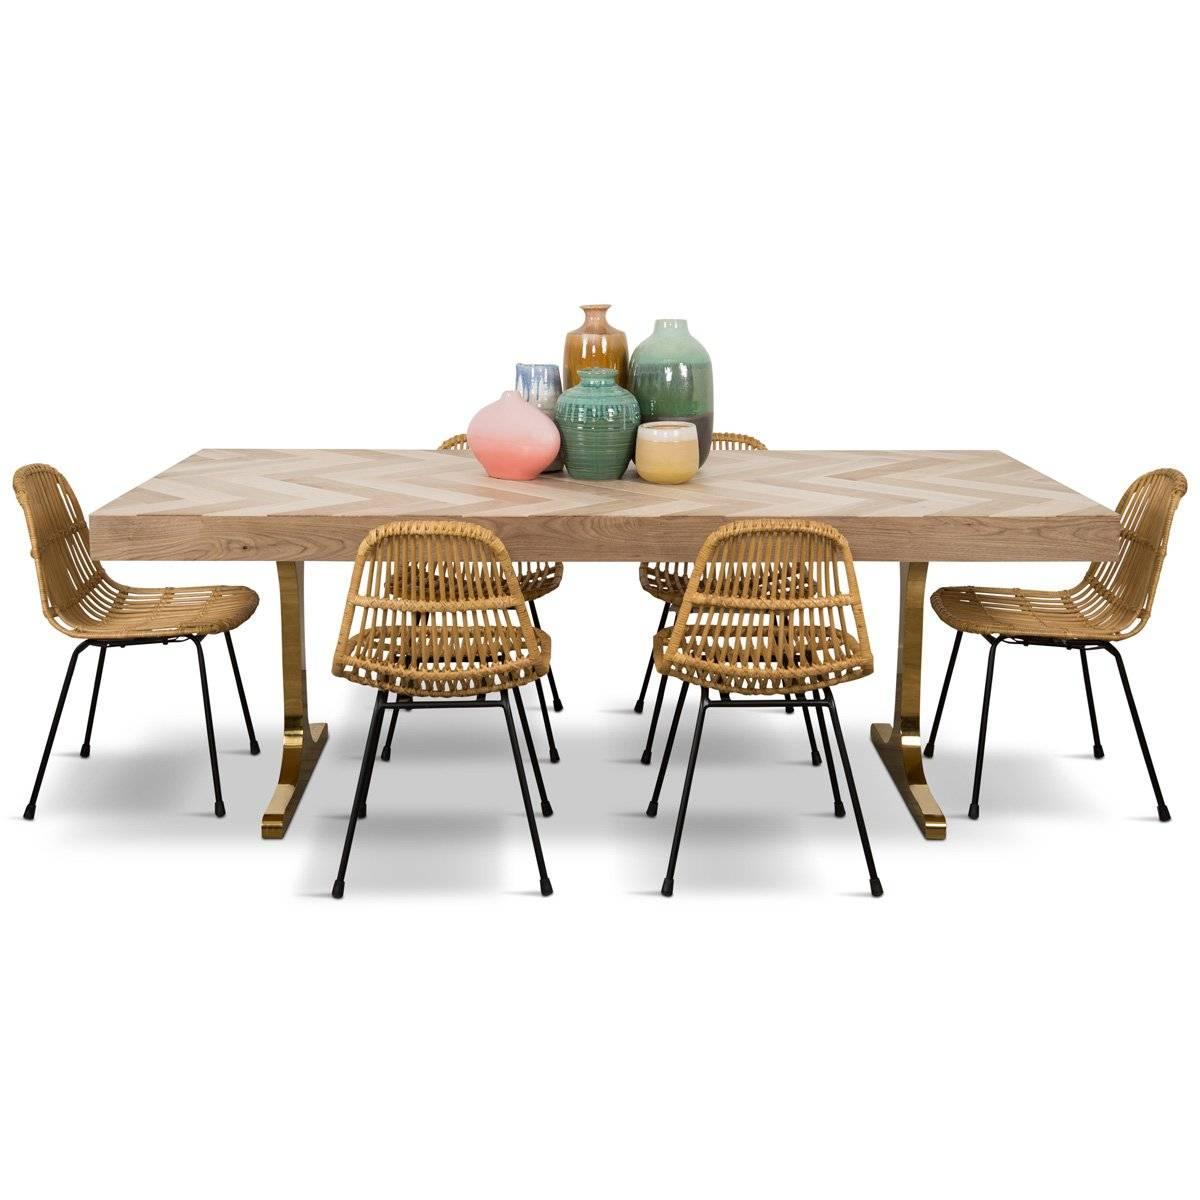 The Amalfi dining table is a wonderful addition to our Amalfi collection. The top is made of solid bleached walnut that is carefully laid out in a herringbone pattern. The table is supported with two elegant brass T-legs.

Dimensions:
84